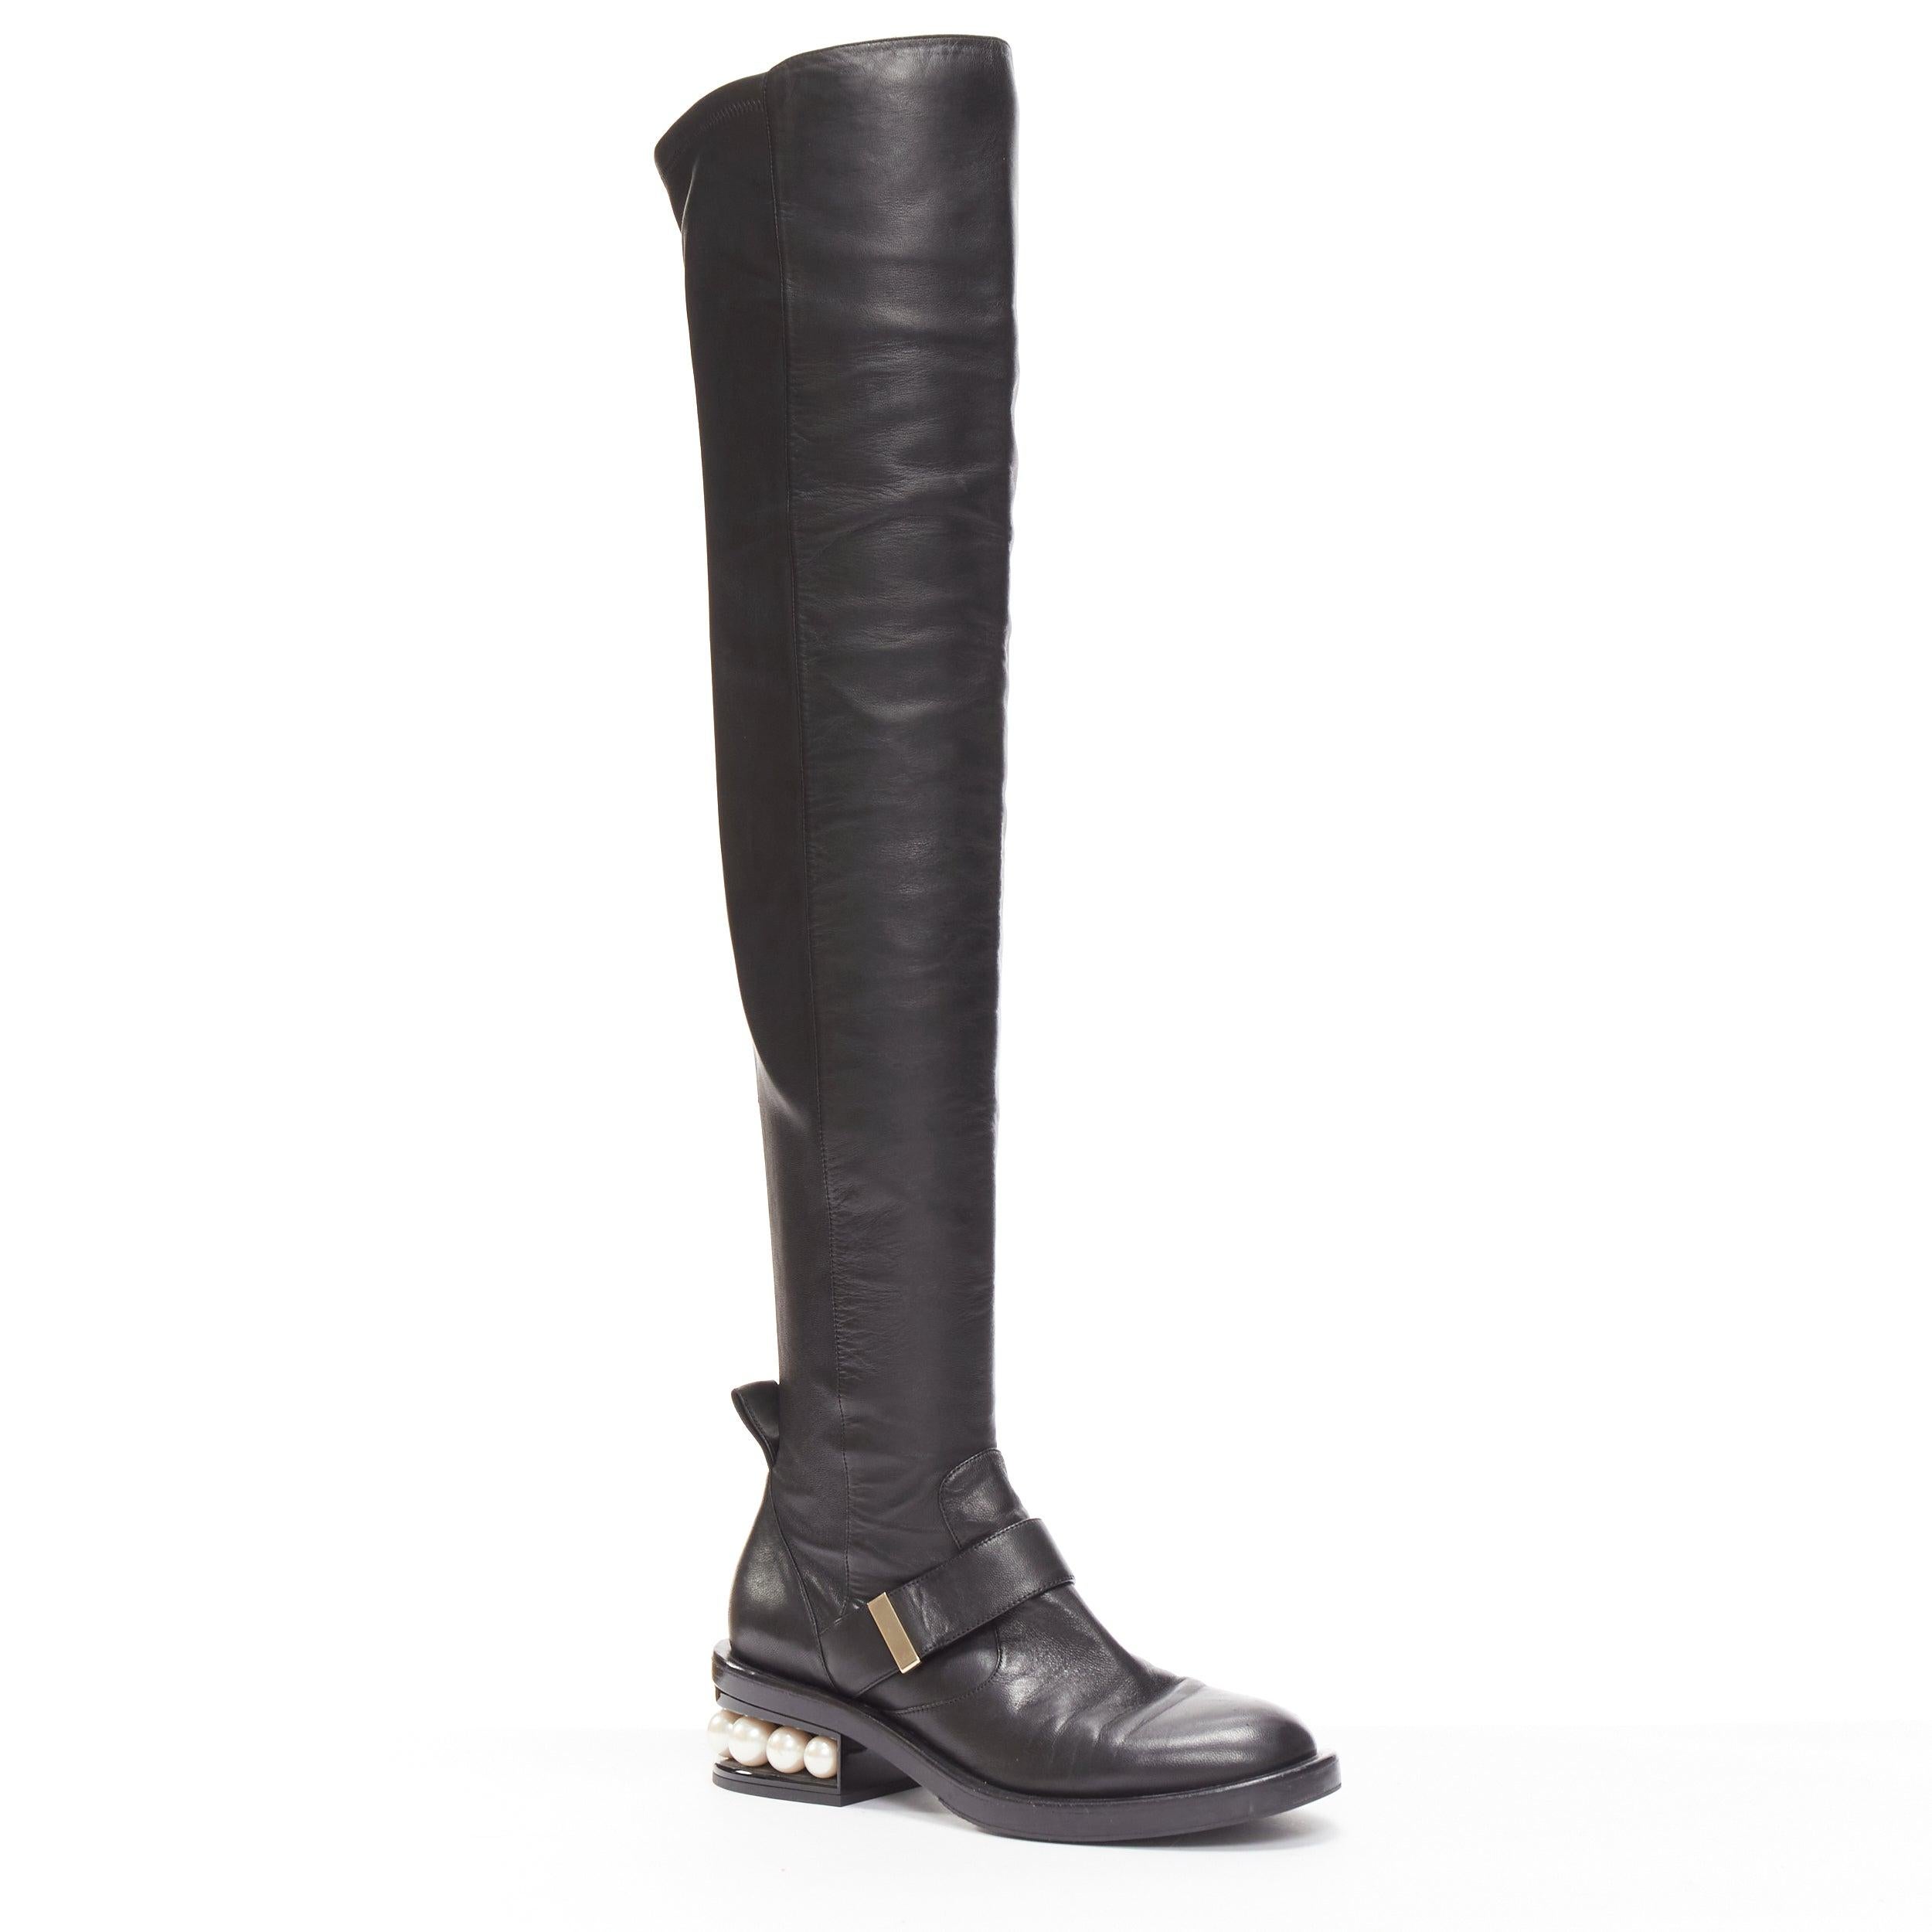 NICOLAS KIRKWOOD black XL pearl embellished heel knee high flat boots EU37.5
Reference: NKLL/A00095
Brand: Nicholas Kirkwood
Material: Leather
Color: Black, Pearl
Pattern: Solid
Closure: Stretchy
Extra Details: Black soft leather stretch fit.